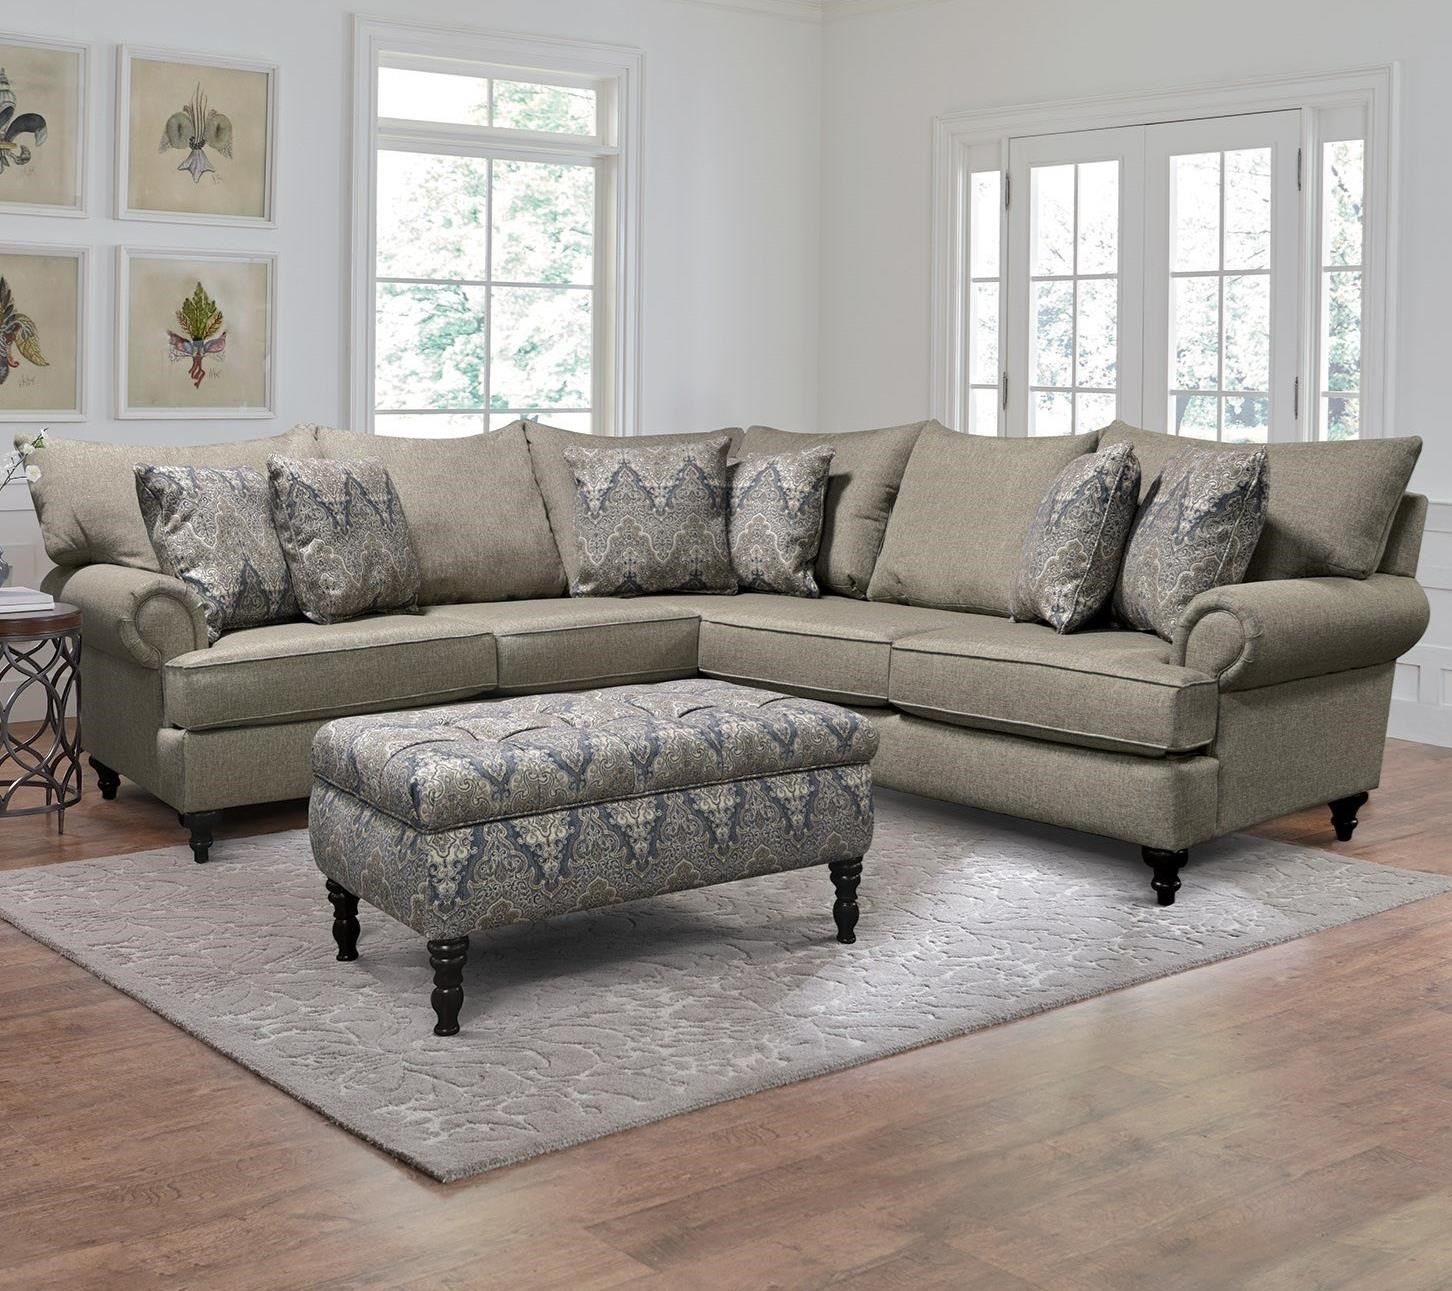 Cozy And Beautiful England Sectional Sofas